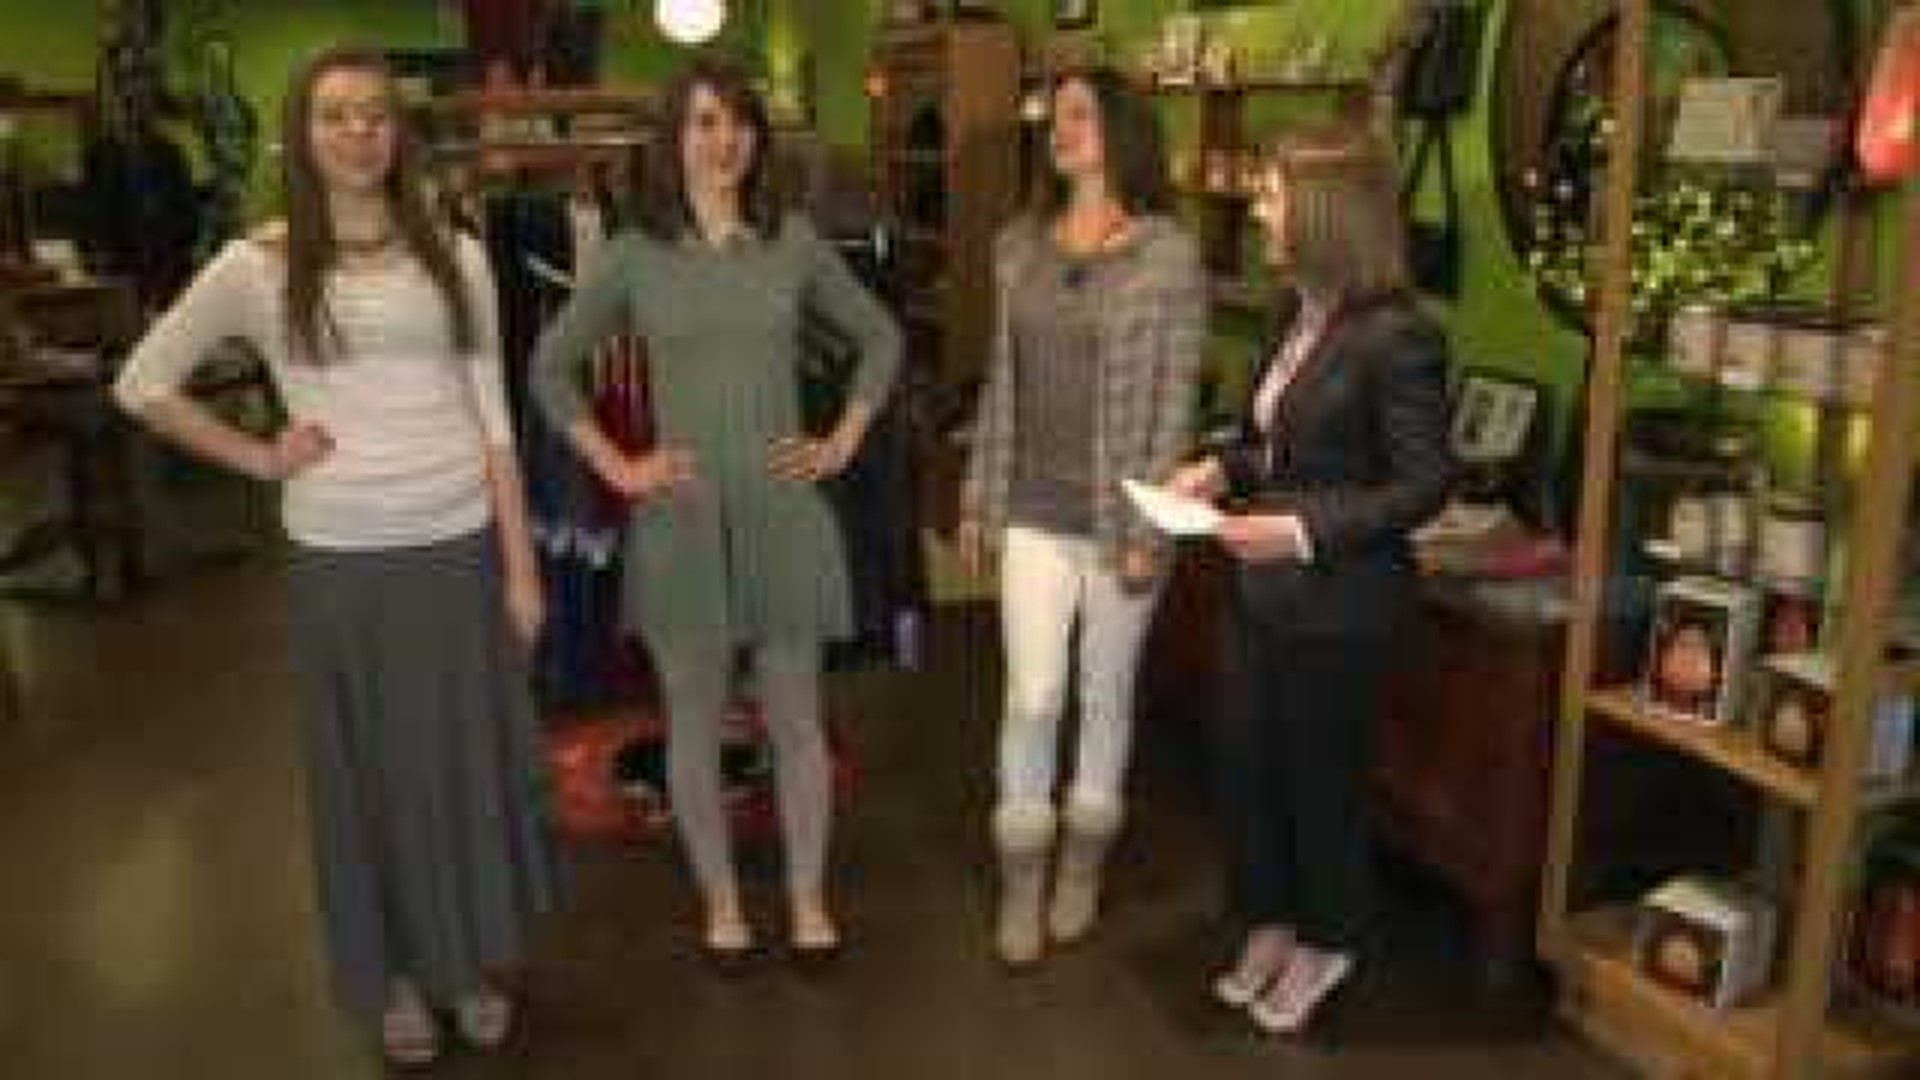 Get a preview of Northwest Arkansas Fashion Week